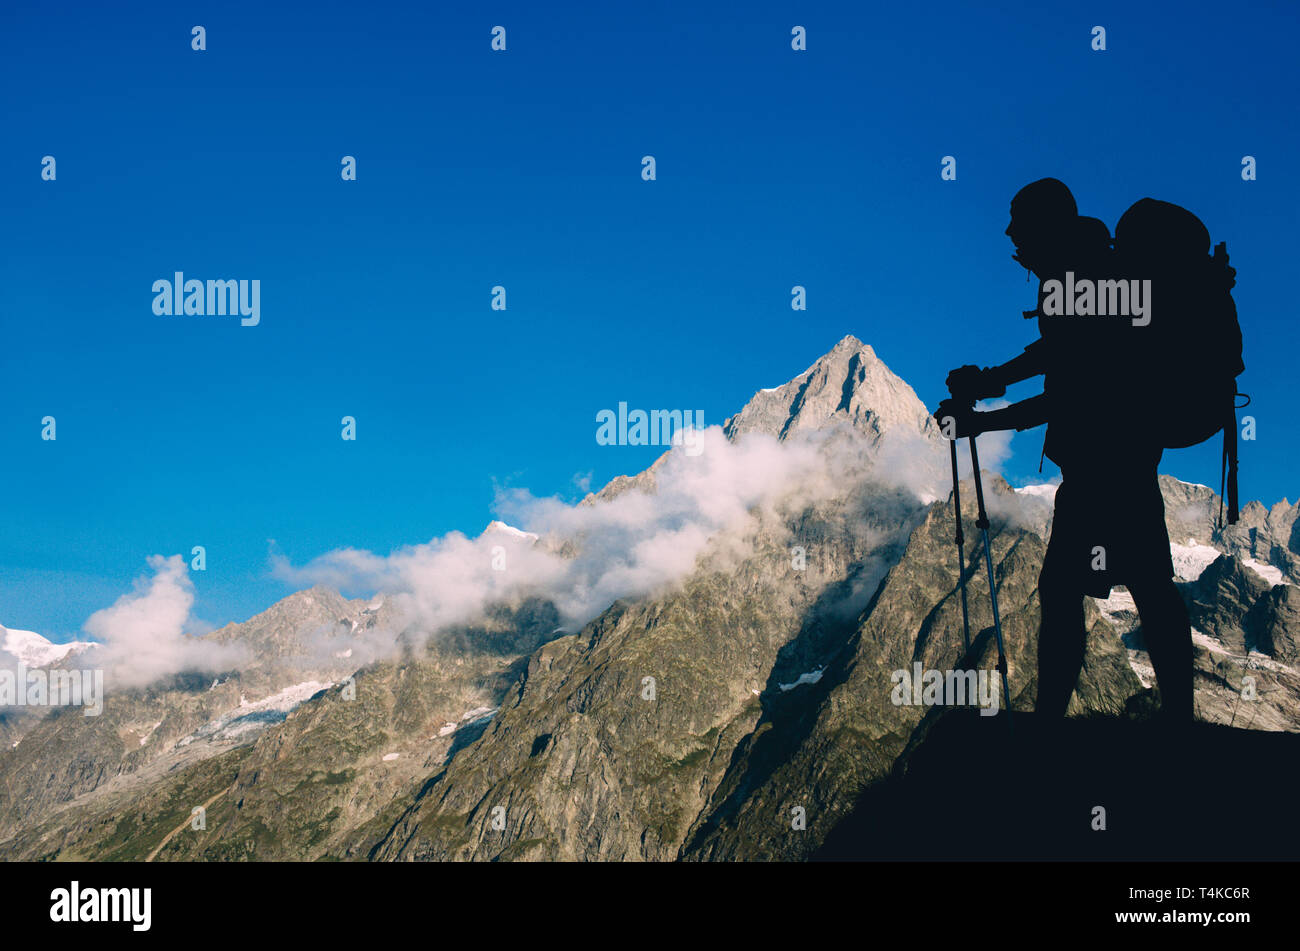 Silhouette man with backpack and trekking pole, hiking over European Alps on the background. Stock Photo